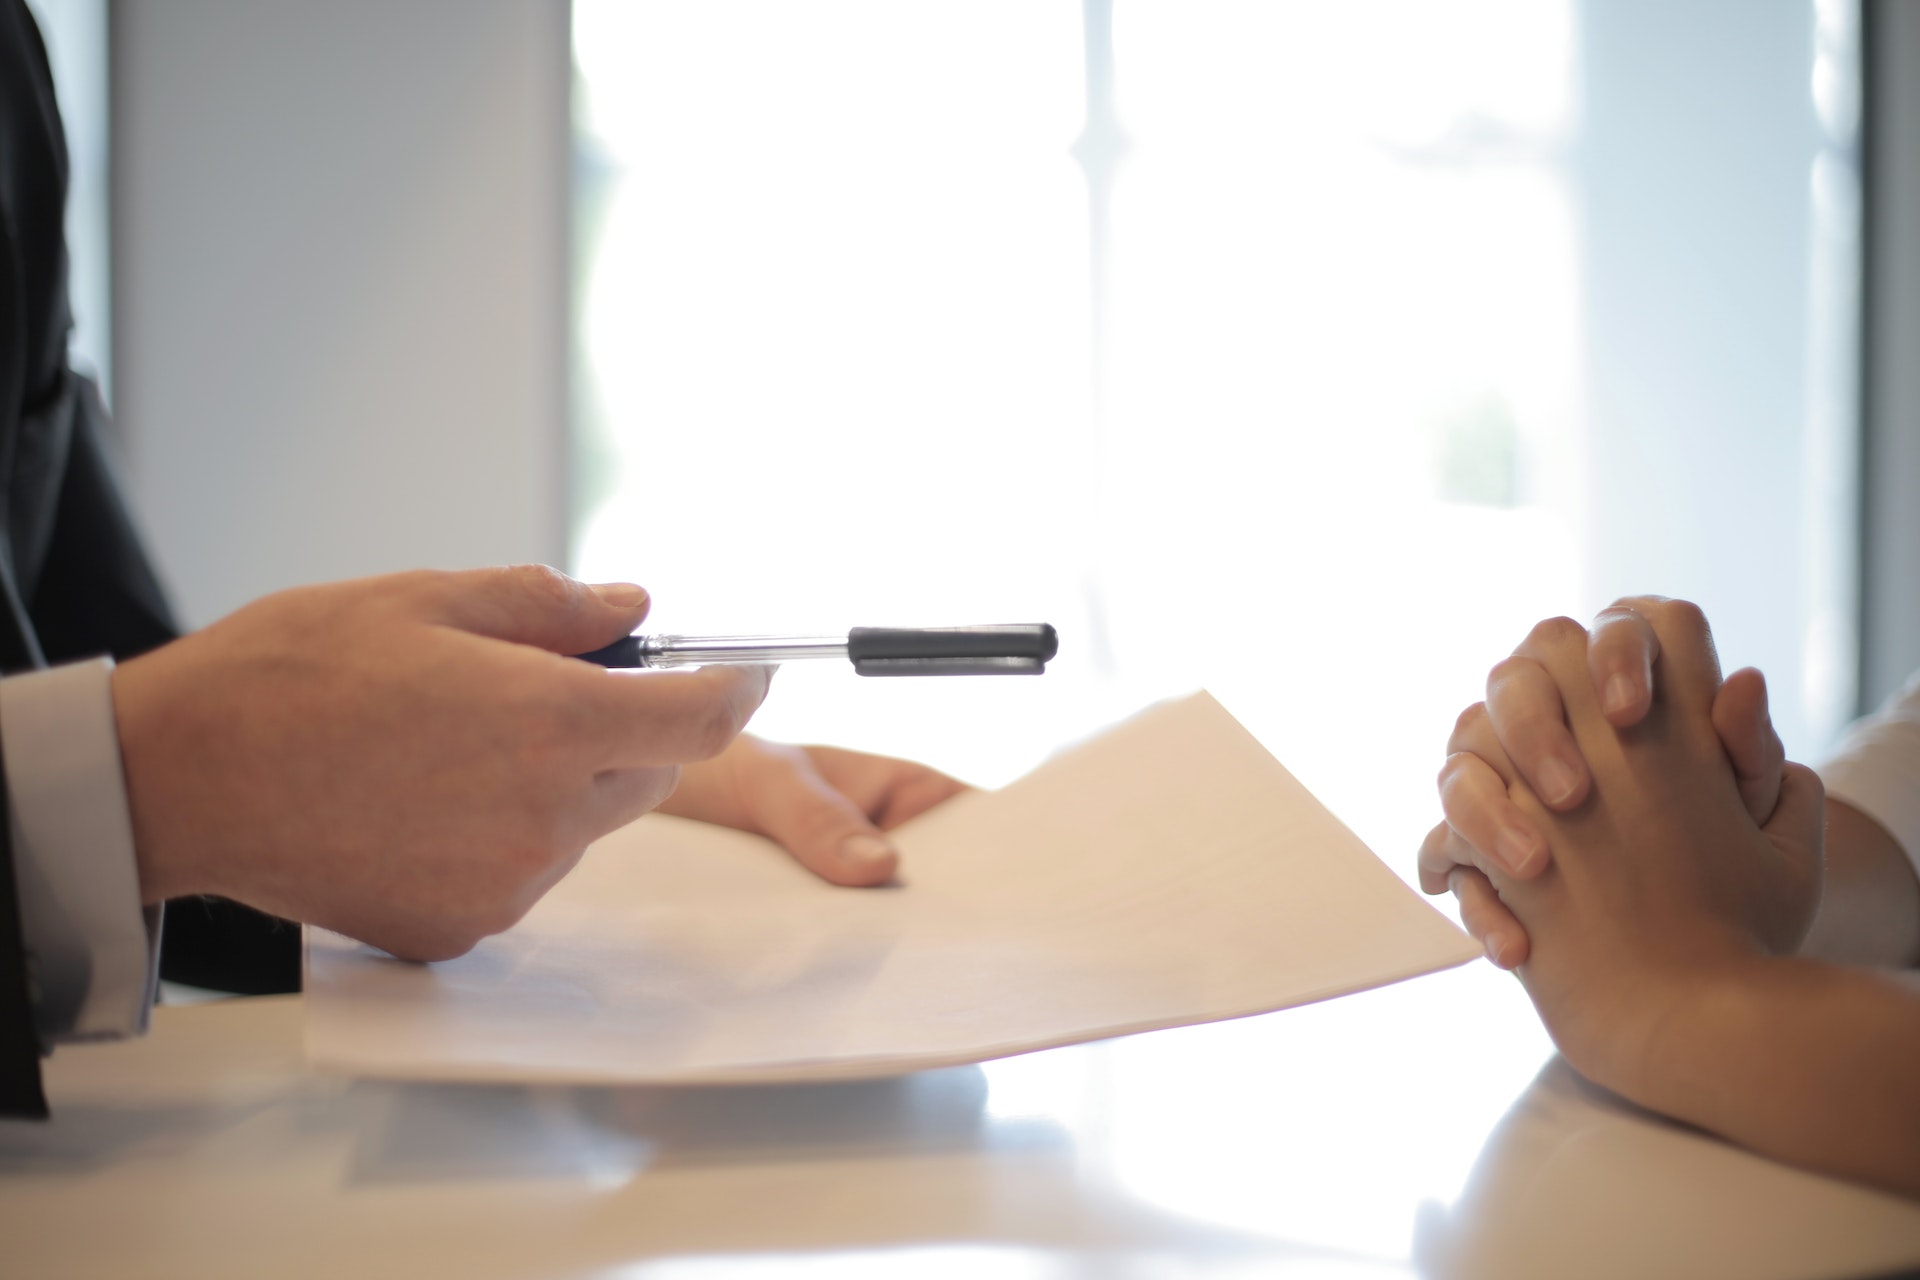 A man handing a pen and a paper to a woman | Source: Pexels